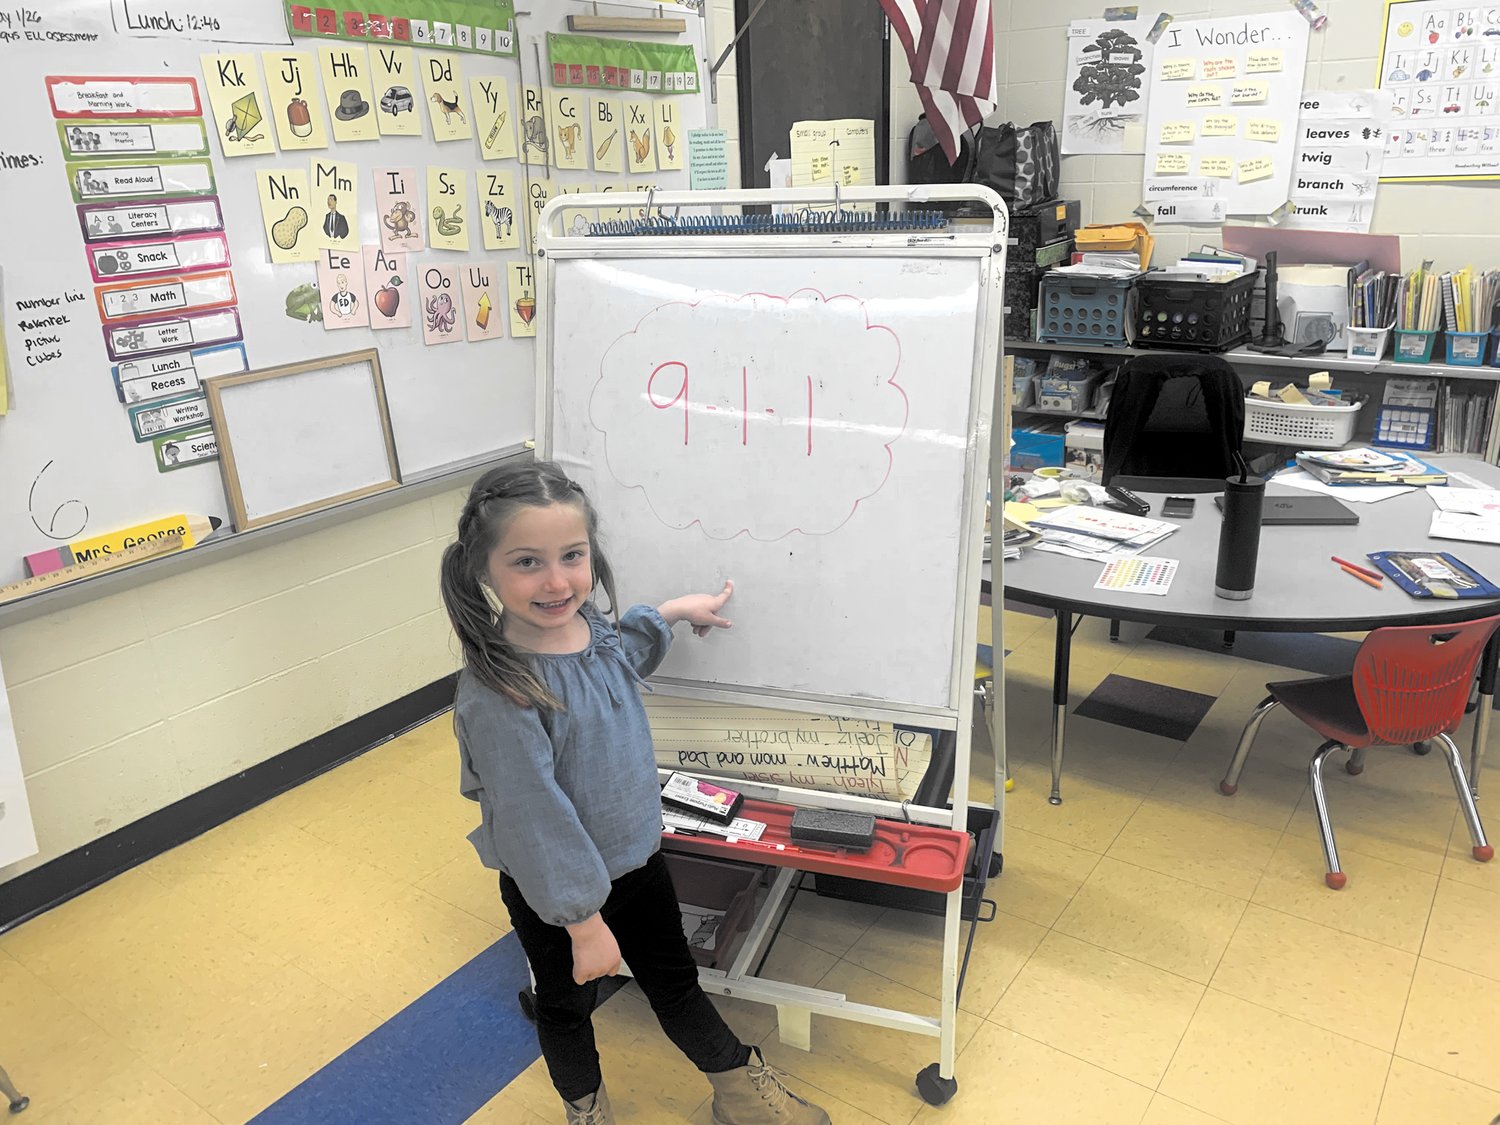 ON THE BOARD: Brooklyn Kraemer points to the code she used to summon help for her grandmother. (Warwick Beacon photo)